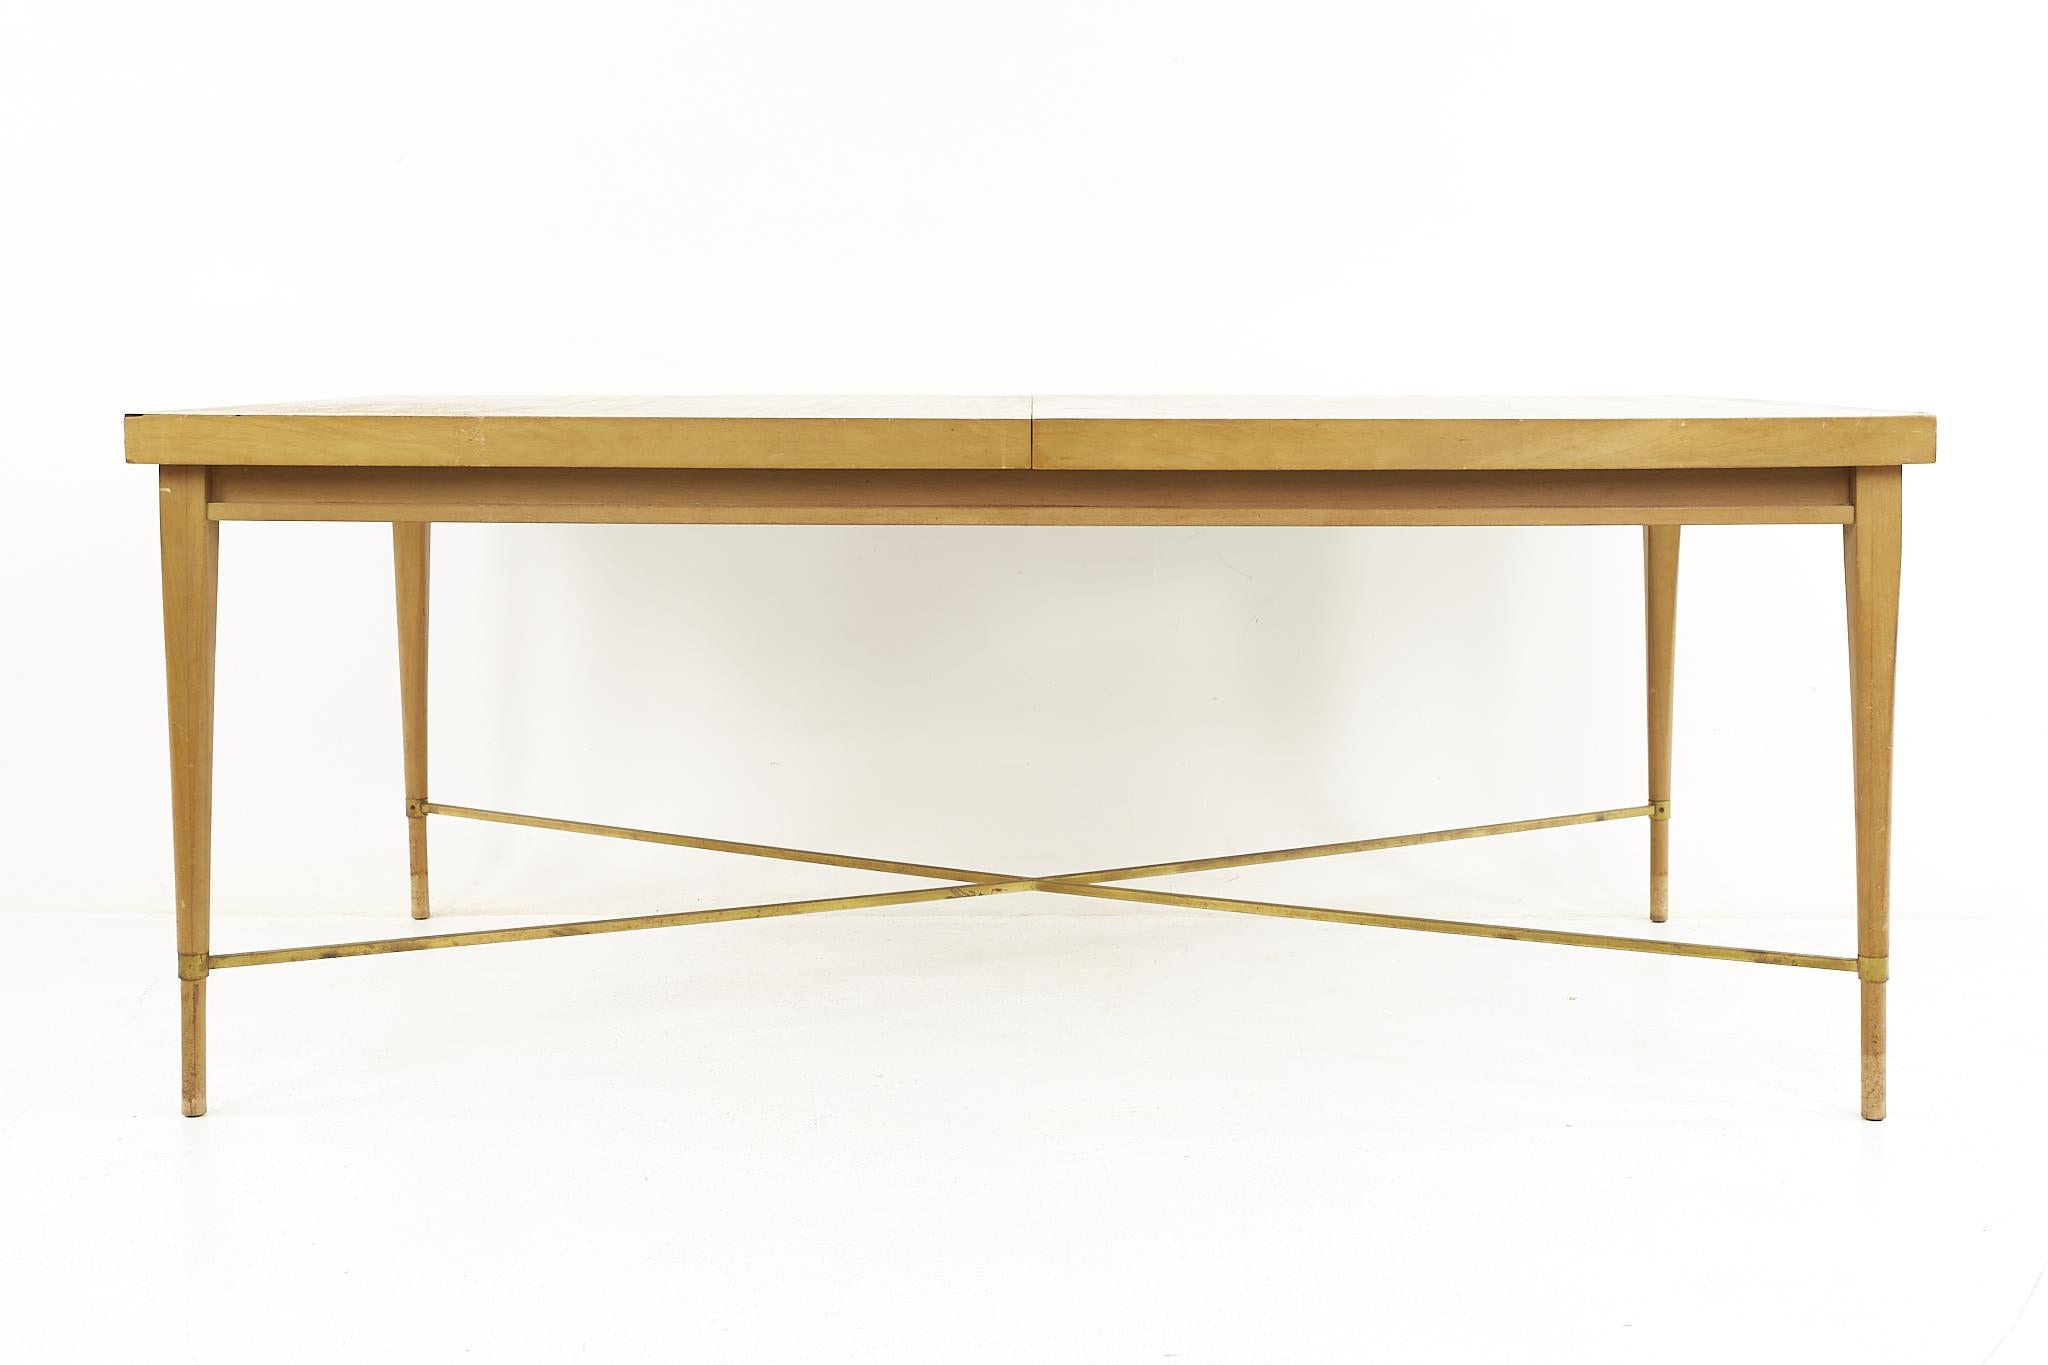 Paul McCobb for Calvin mid century brass X base dining table

The table measures: 71.75 wide x 40 deep x 29 high, with a chair clearance of 24.5 inches; each leaf is 15 inches wide, making a maximum table width of 101.75 inches when both leaves